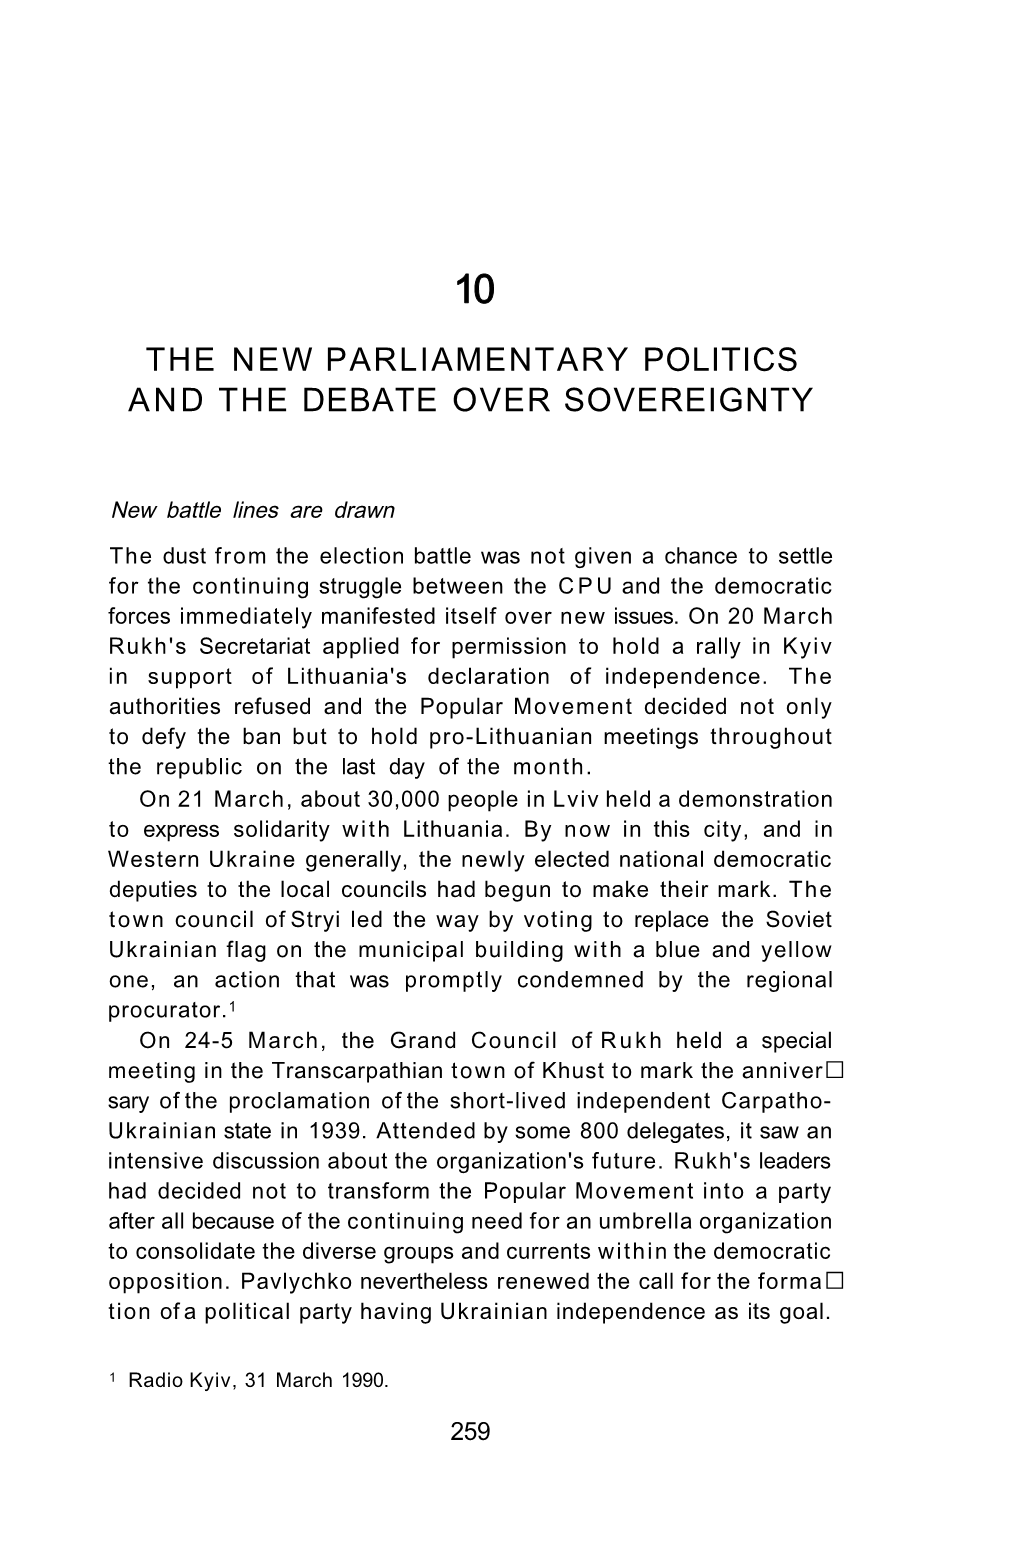 10. the New Parliamentary Politics and the Debate Over